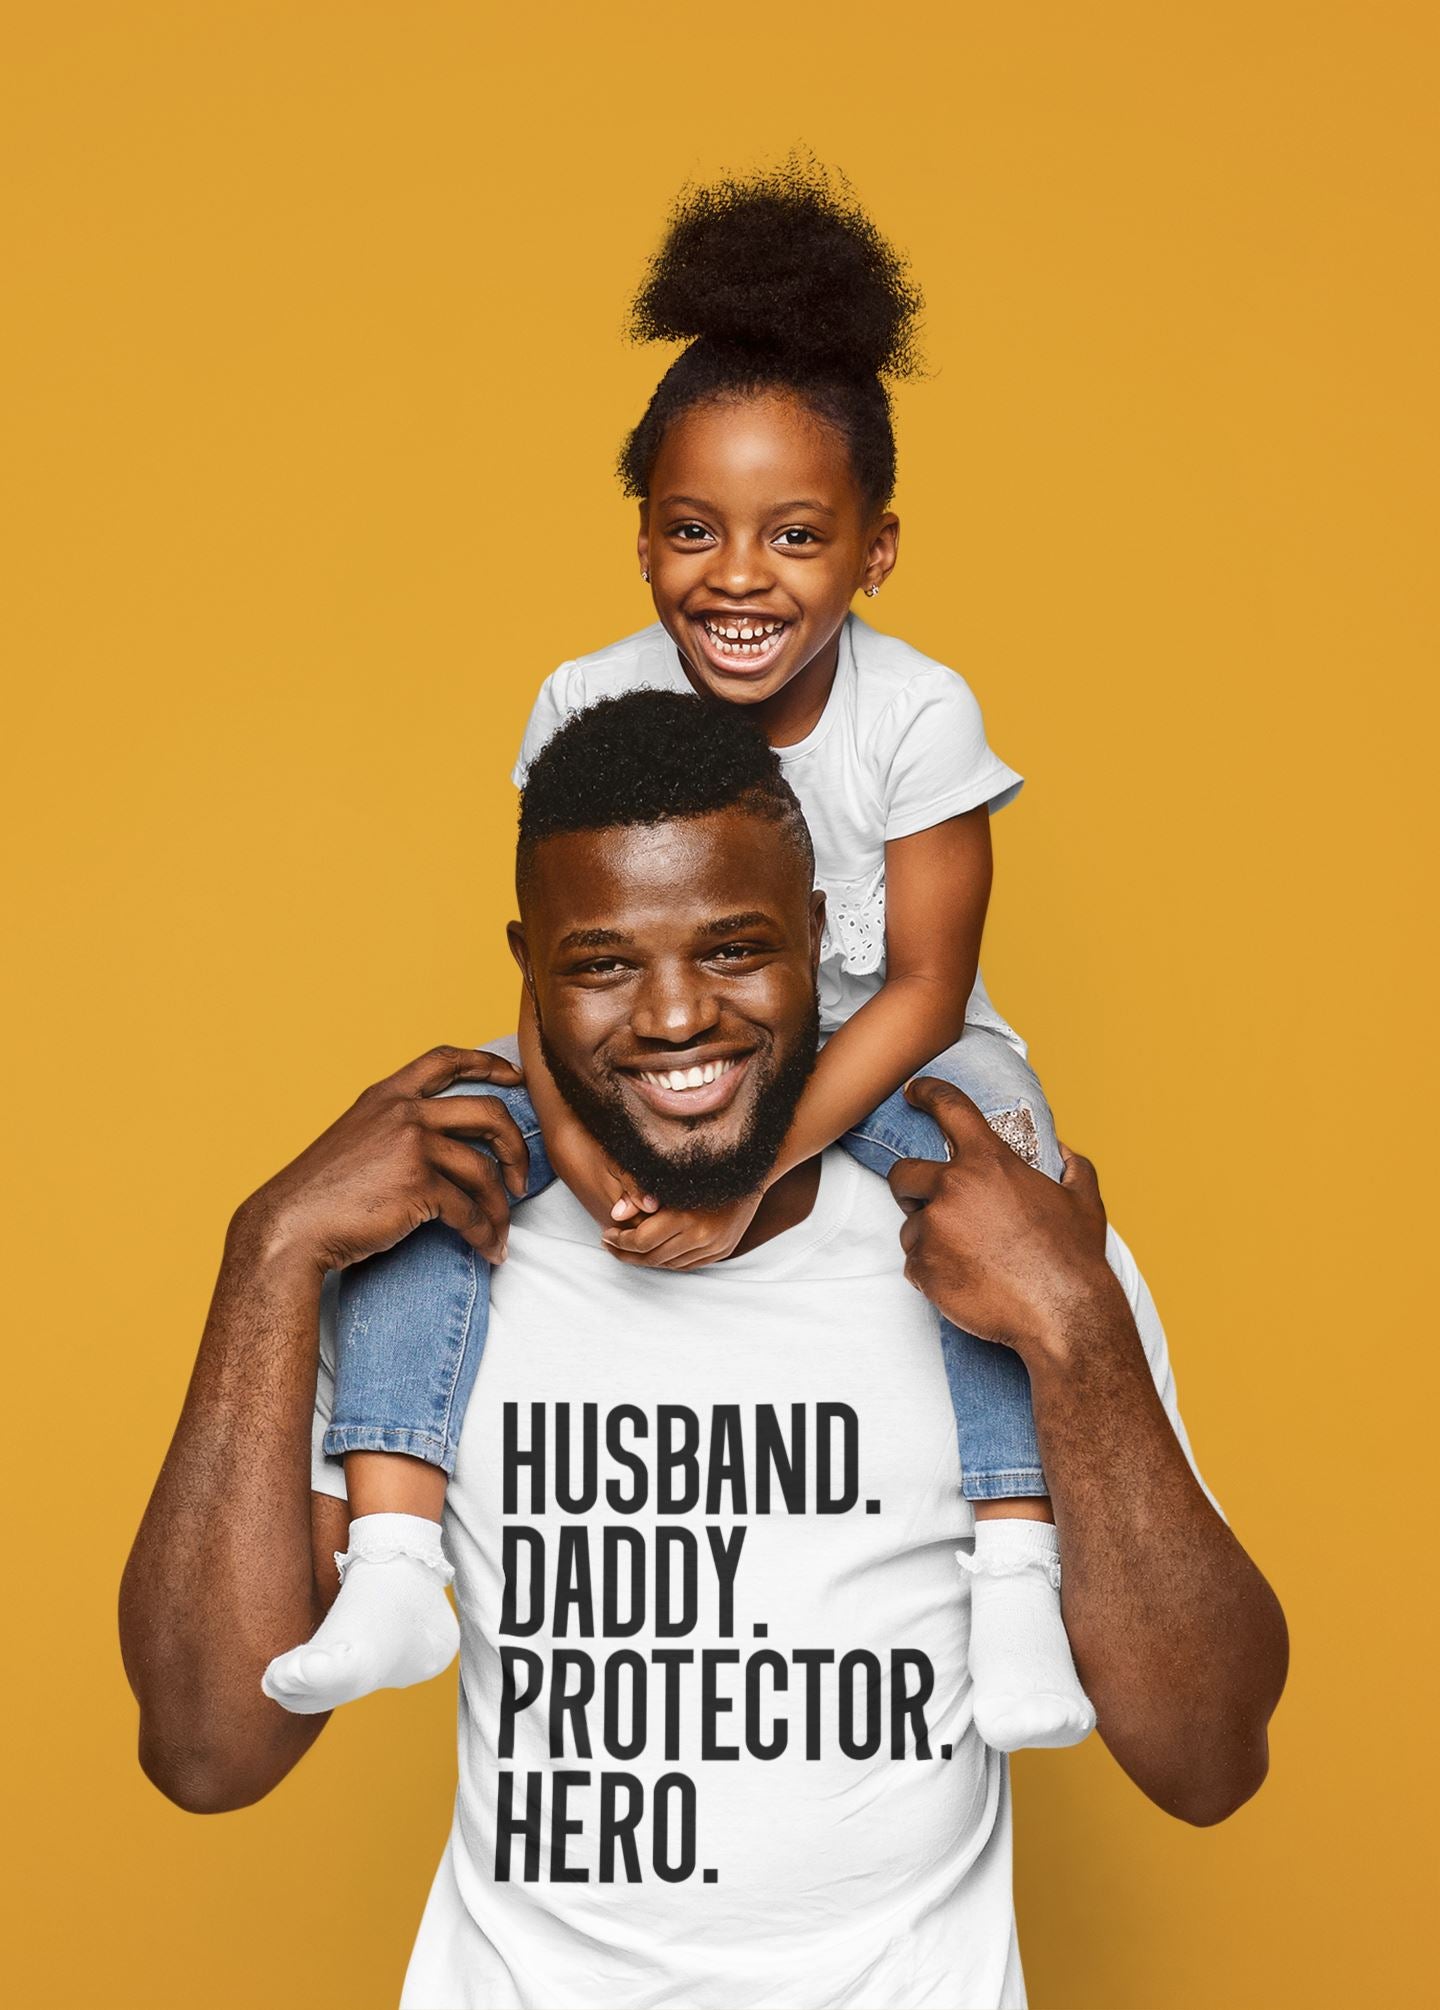 Fatherhood Themed T-Shirts, Father's Day Shirts, Husband, Daddy, Protector, Hero, Best Dad Ever, Dad Jokes B1ack By Design LLC Husband Protector Hero S BLACK